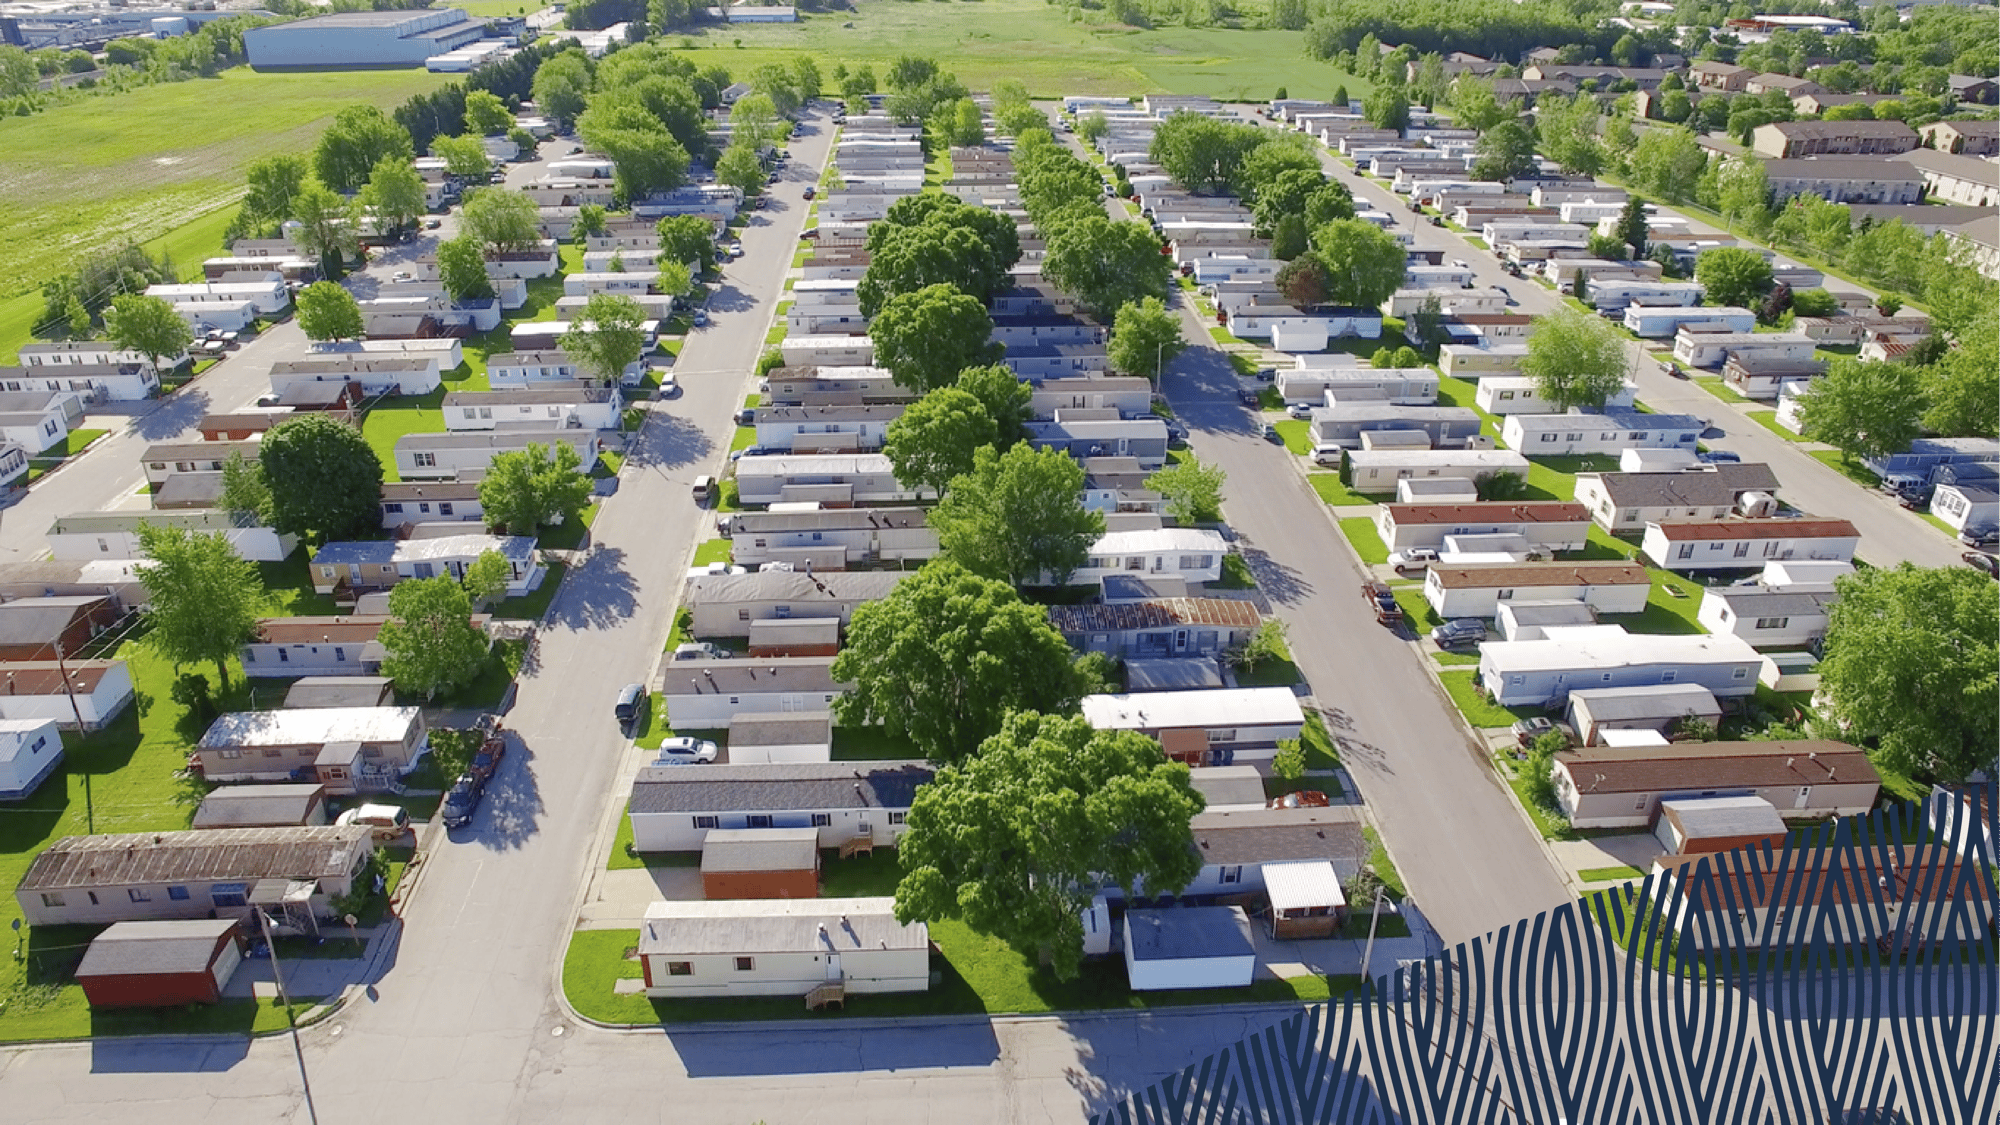 One of Roots' Lush Spacious Manufactured Housing Community